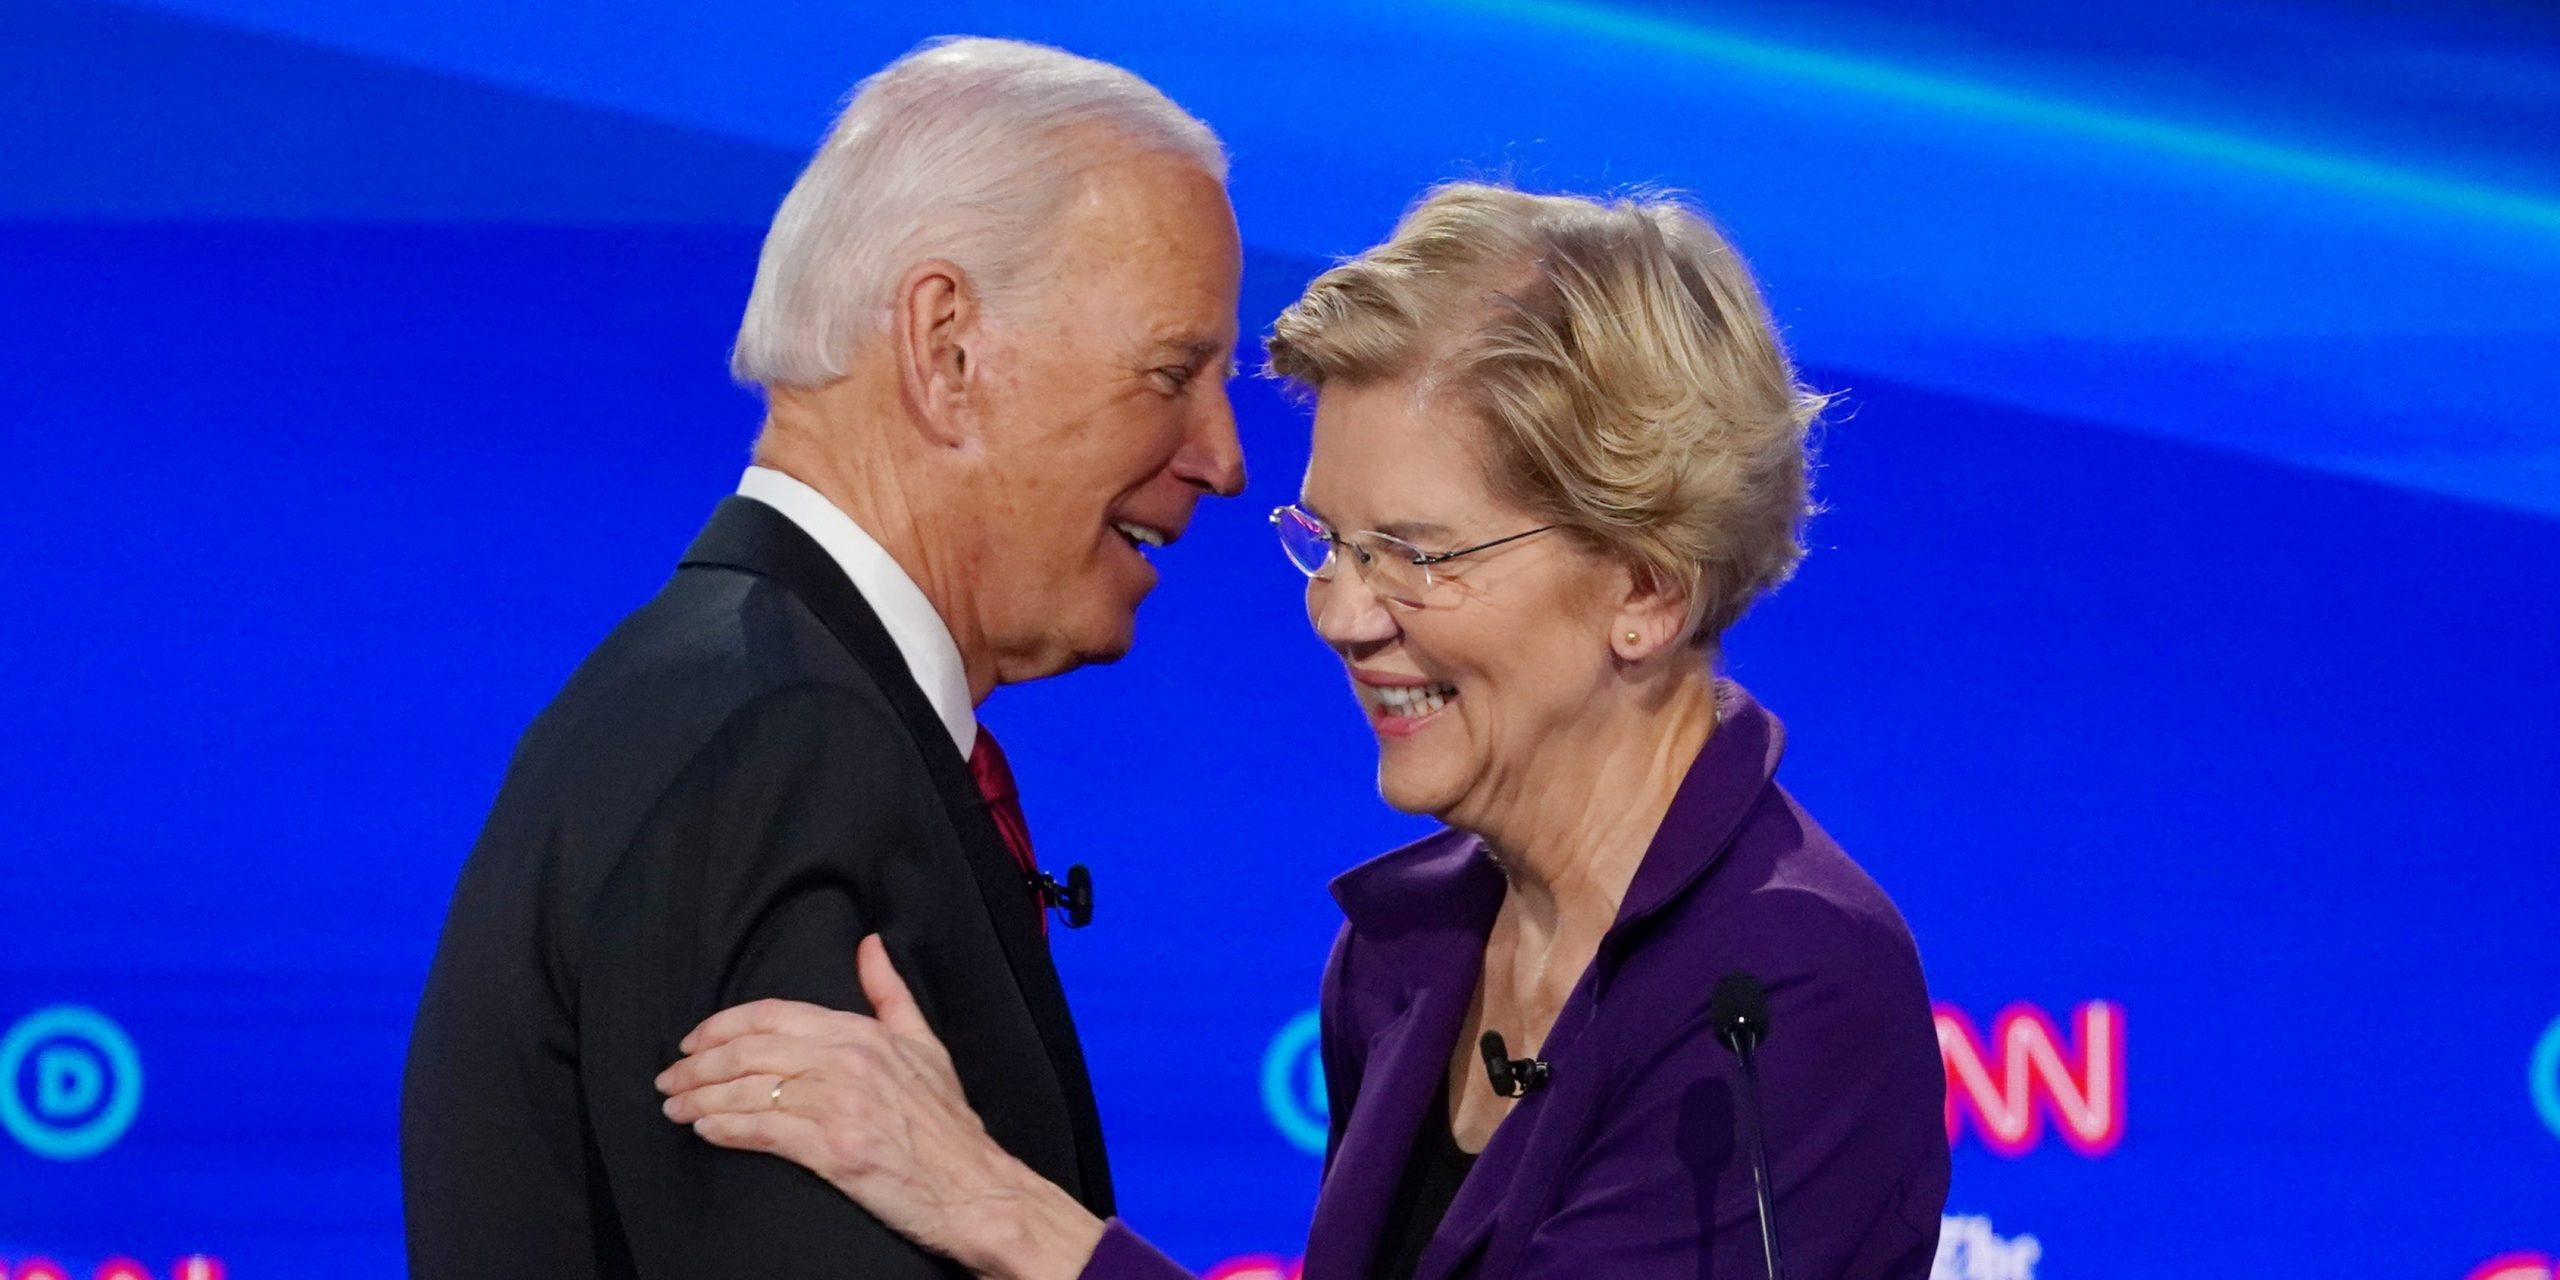 FILE PHOTO: Democratic presidential candidate and former Vice President Joe Biden shakes hands with and hugs Senator Elizabeth Warren after a question about their ages during the fourth U.S. Democratic presidential candidates 2020 election debate at Otterbein University in Westerville, Ohio U.S., October 15, 2019. REUTERS/Shannon Stapleton